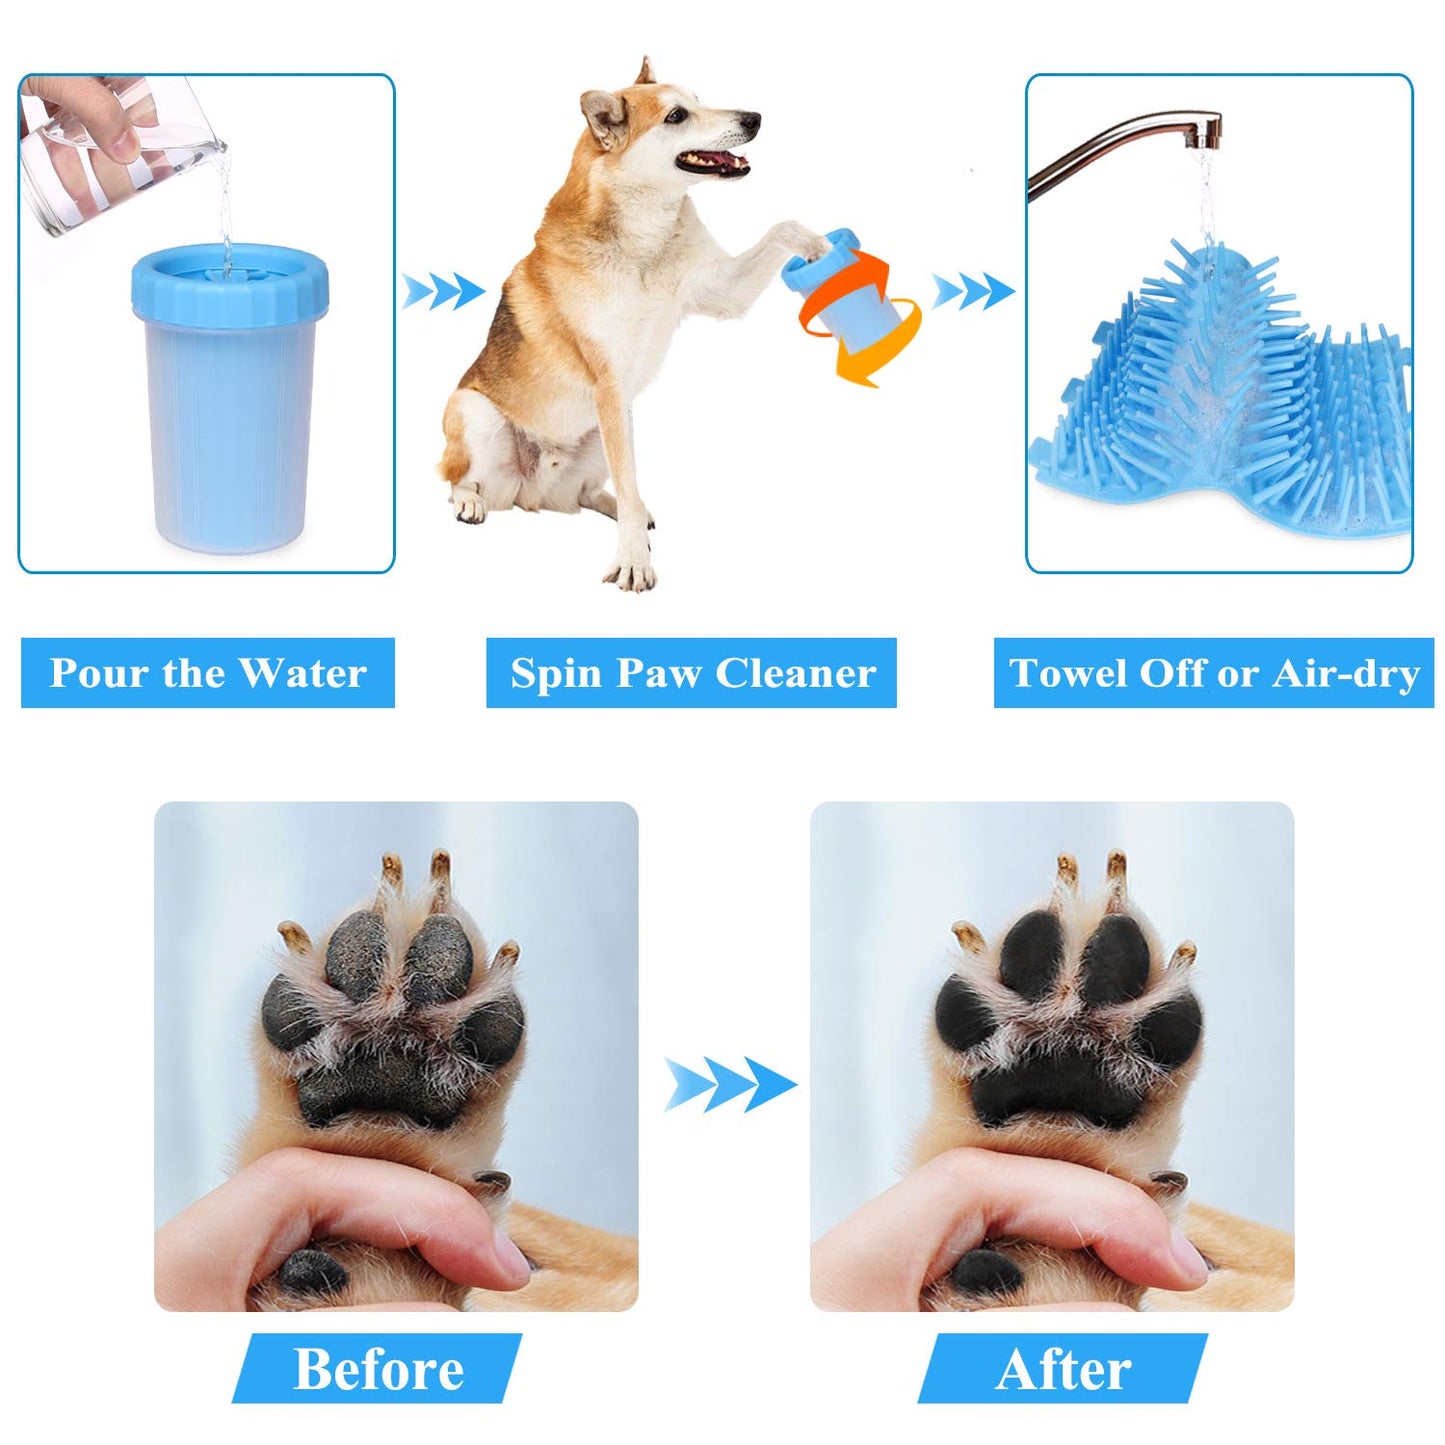 paw cleaner